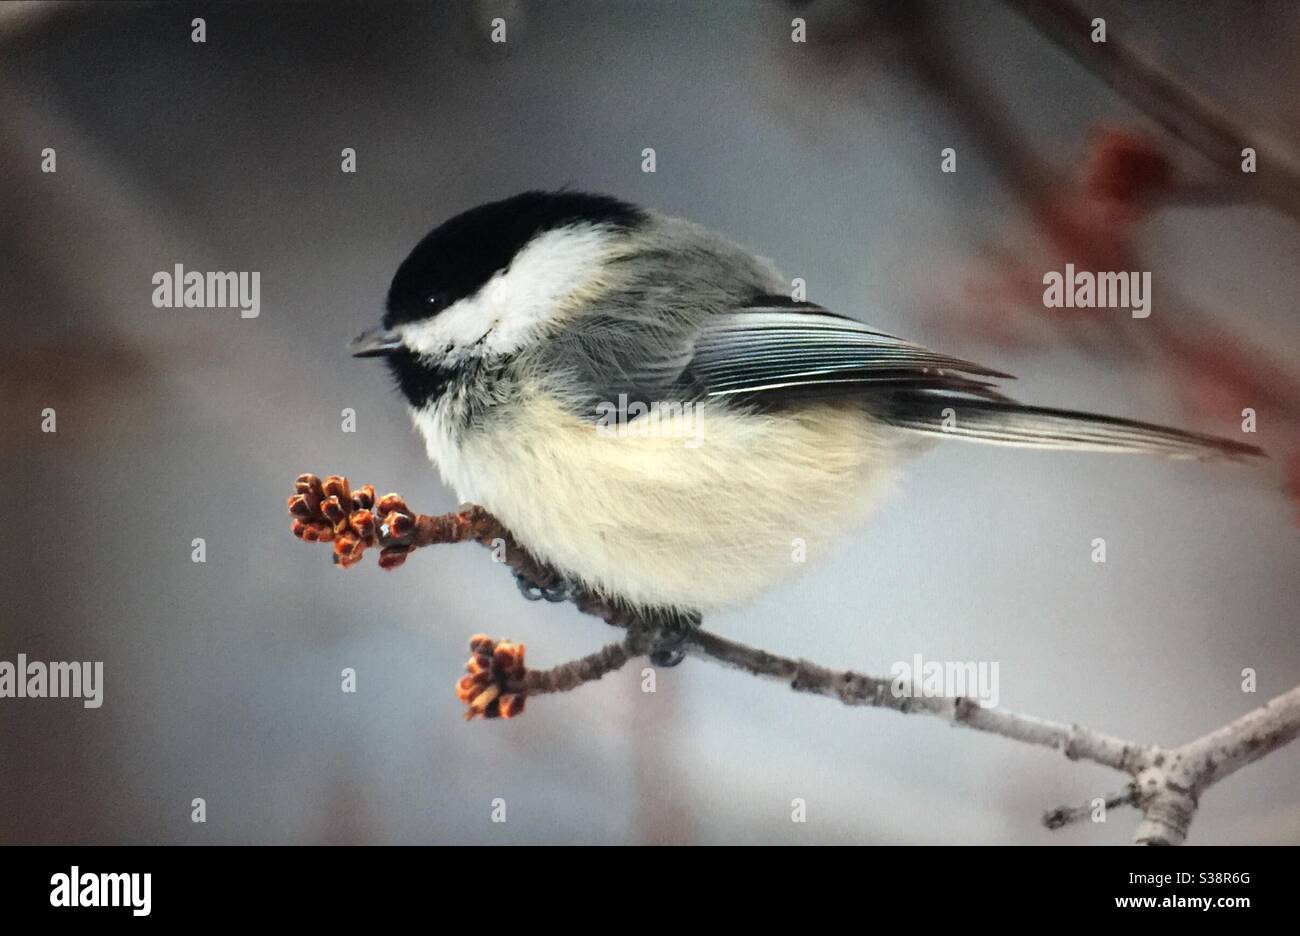 Black-capped Chickadee, Poecile atricapillus, North American Birds, Birds of North America, popular bird, northern United States, southern Canada, always welcomed ,at bird feeders, Stock Photo